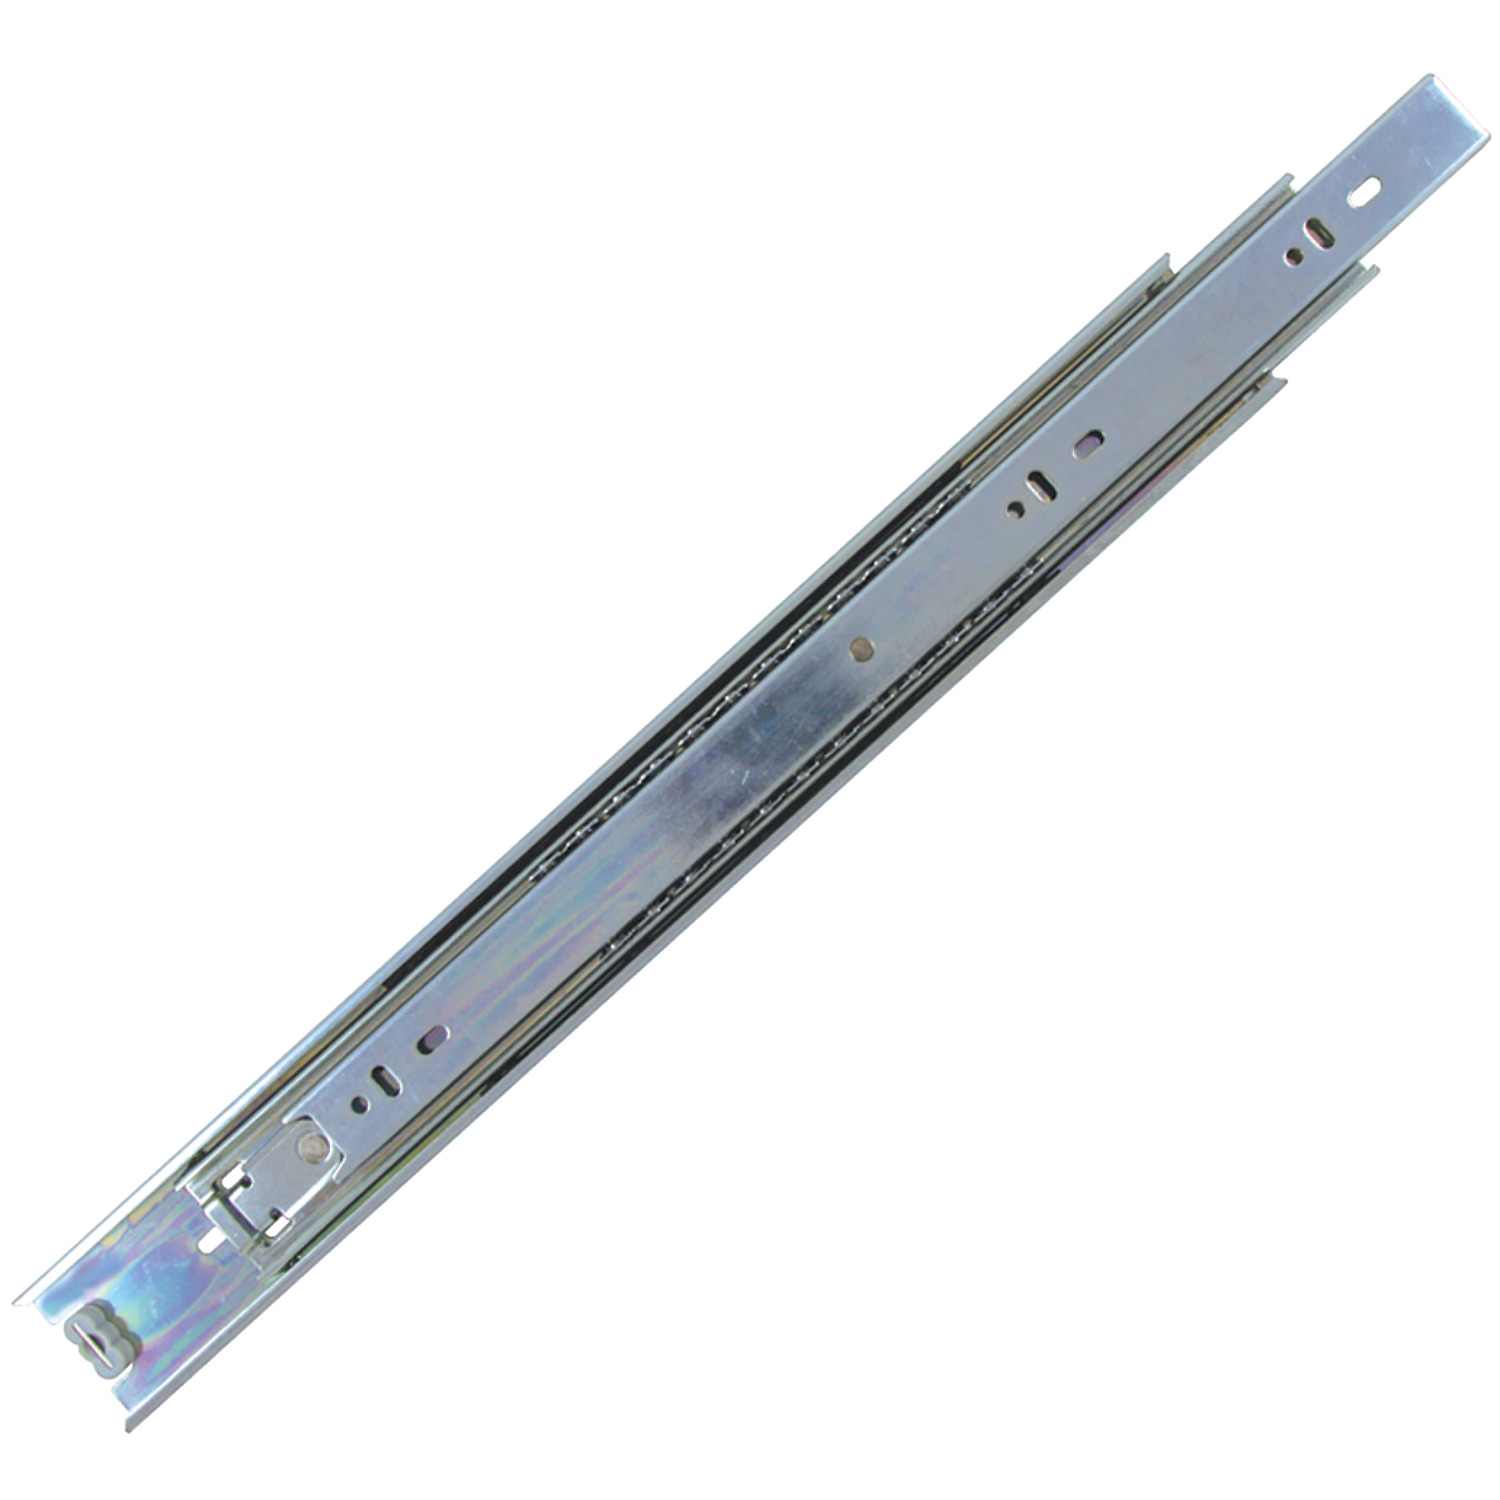 P5100.AC0700 Drawer Slide Full Extn Length 700; Load 45kg per pair. Sold Individually. Lever Disconnect; Positive Lock